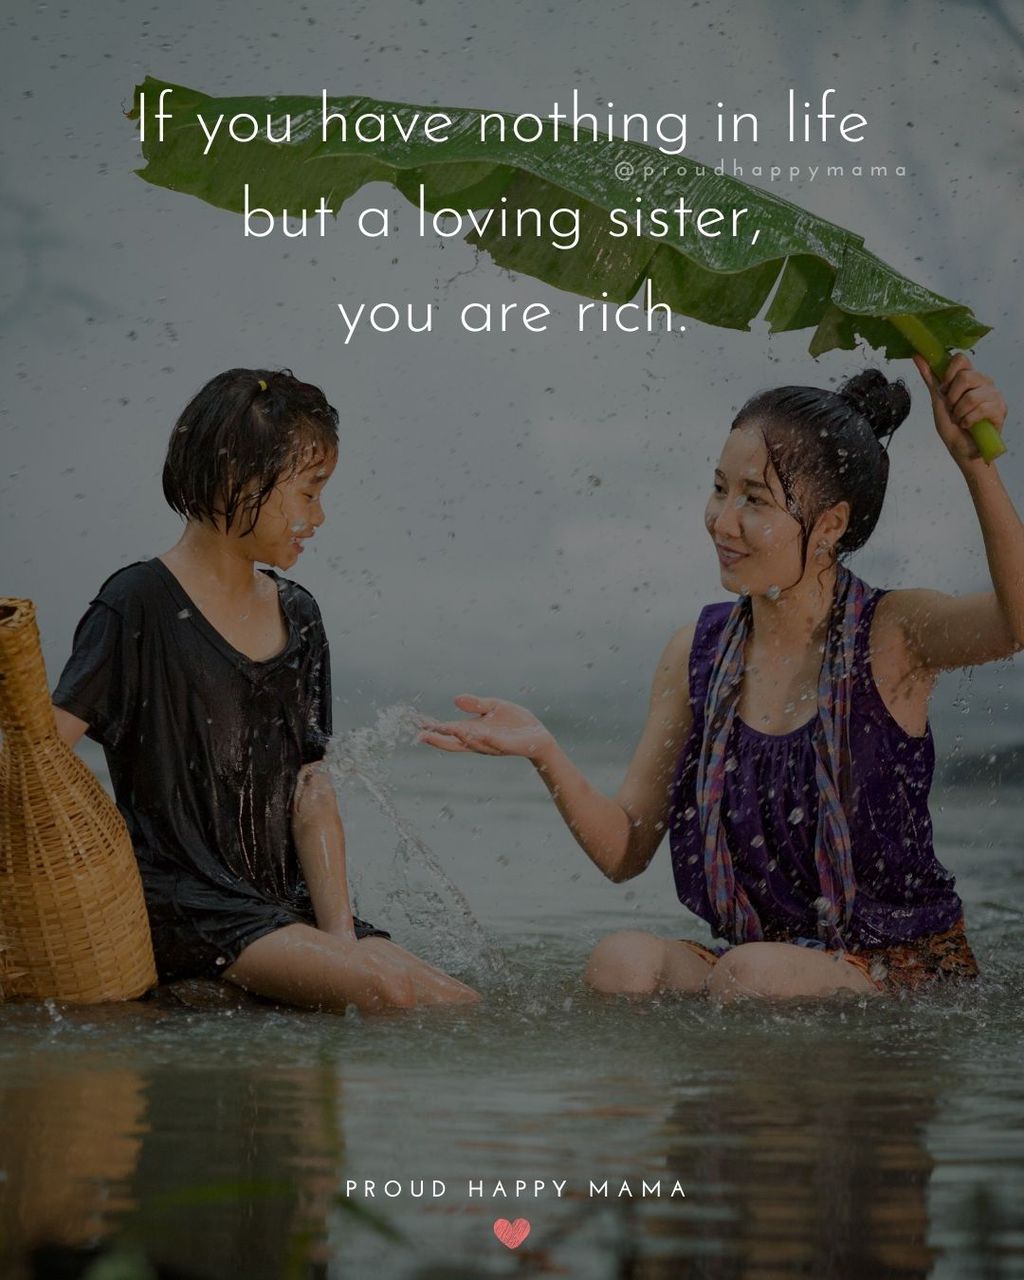 Sister Quotes - If you have nothing in life but a loving sister, you are rich